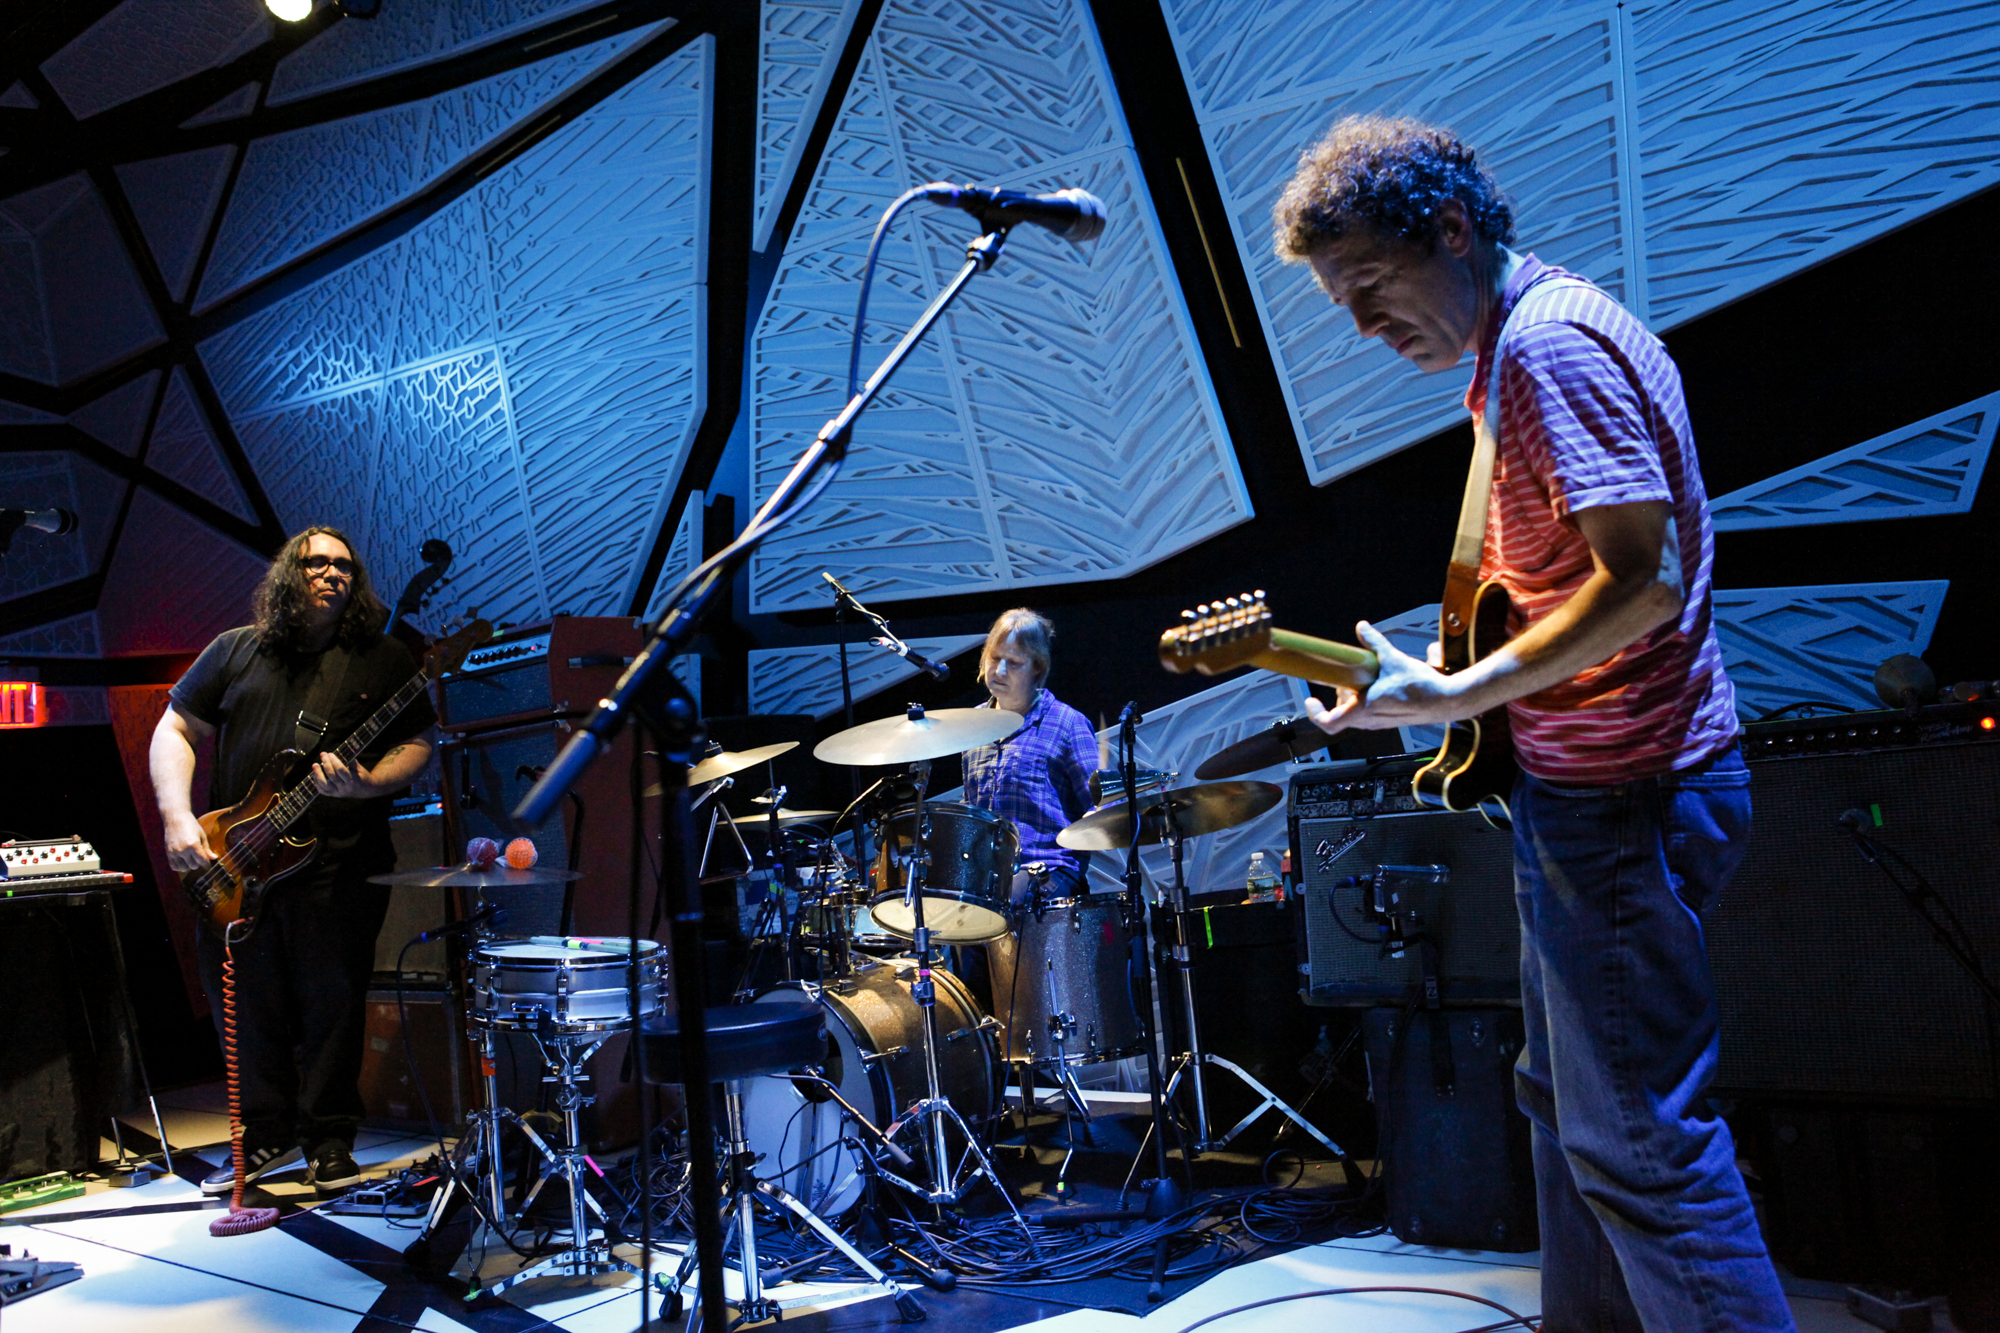 Yo La Tengo plays at National Sawdust in Williamsburg, Brooklyn, New York on Feb. 27, 2018. (© Michael Katzif - Do not use or republish without prior consent.)